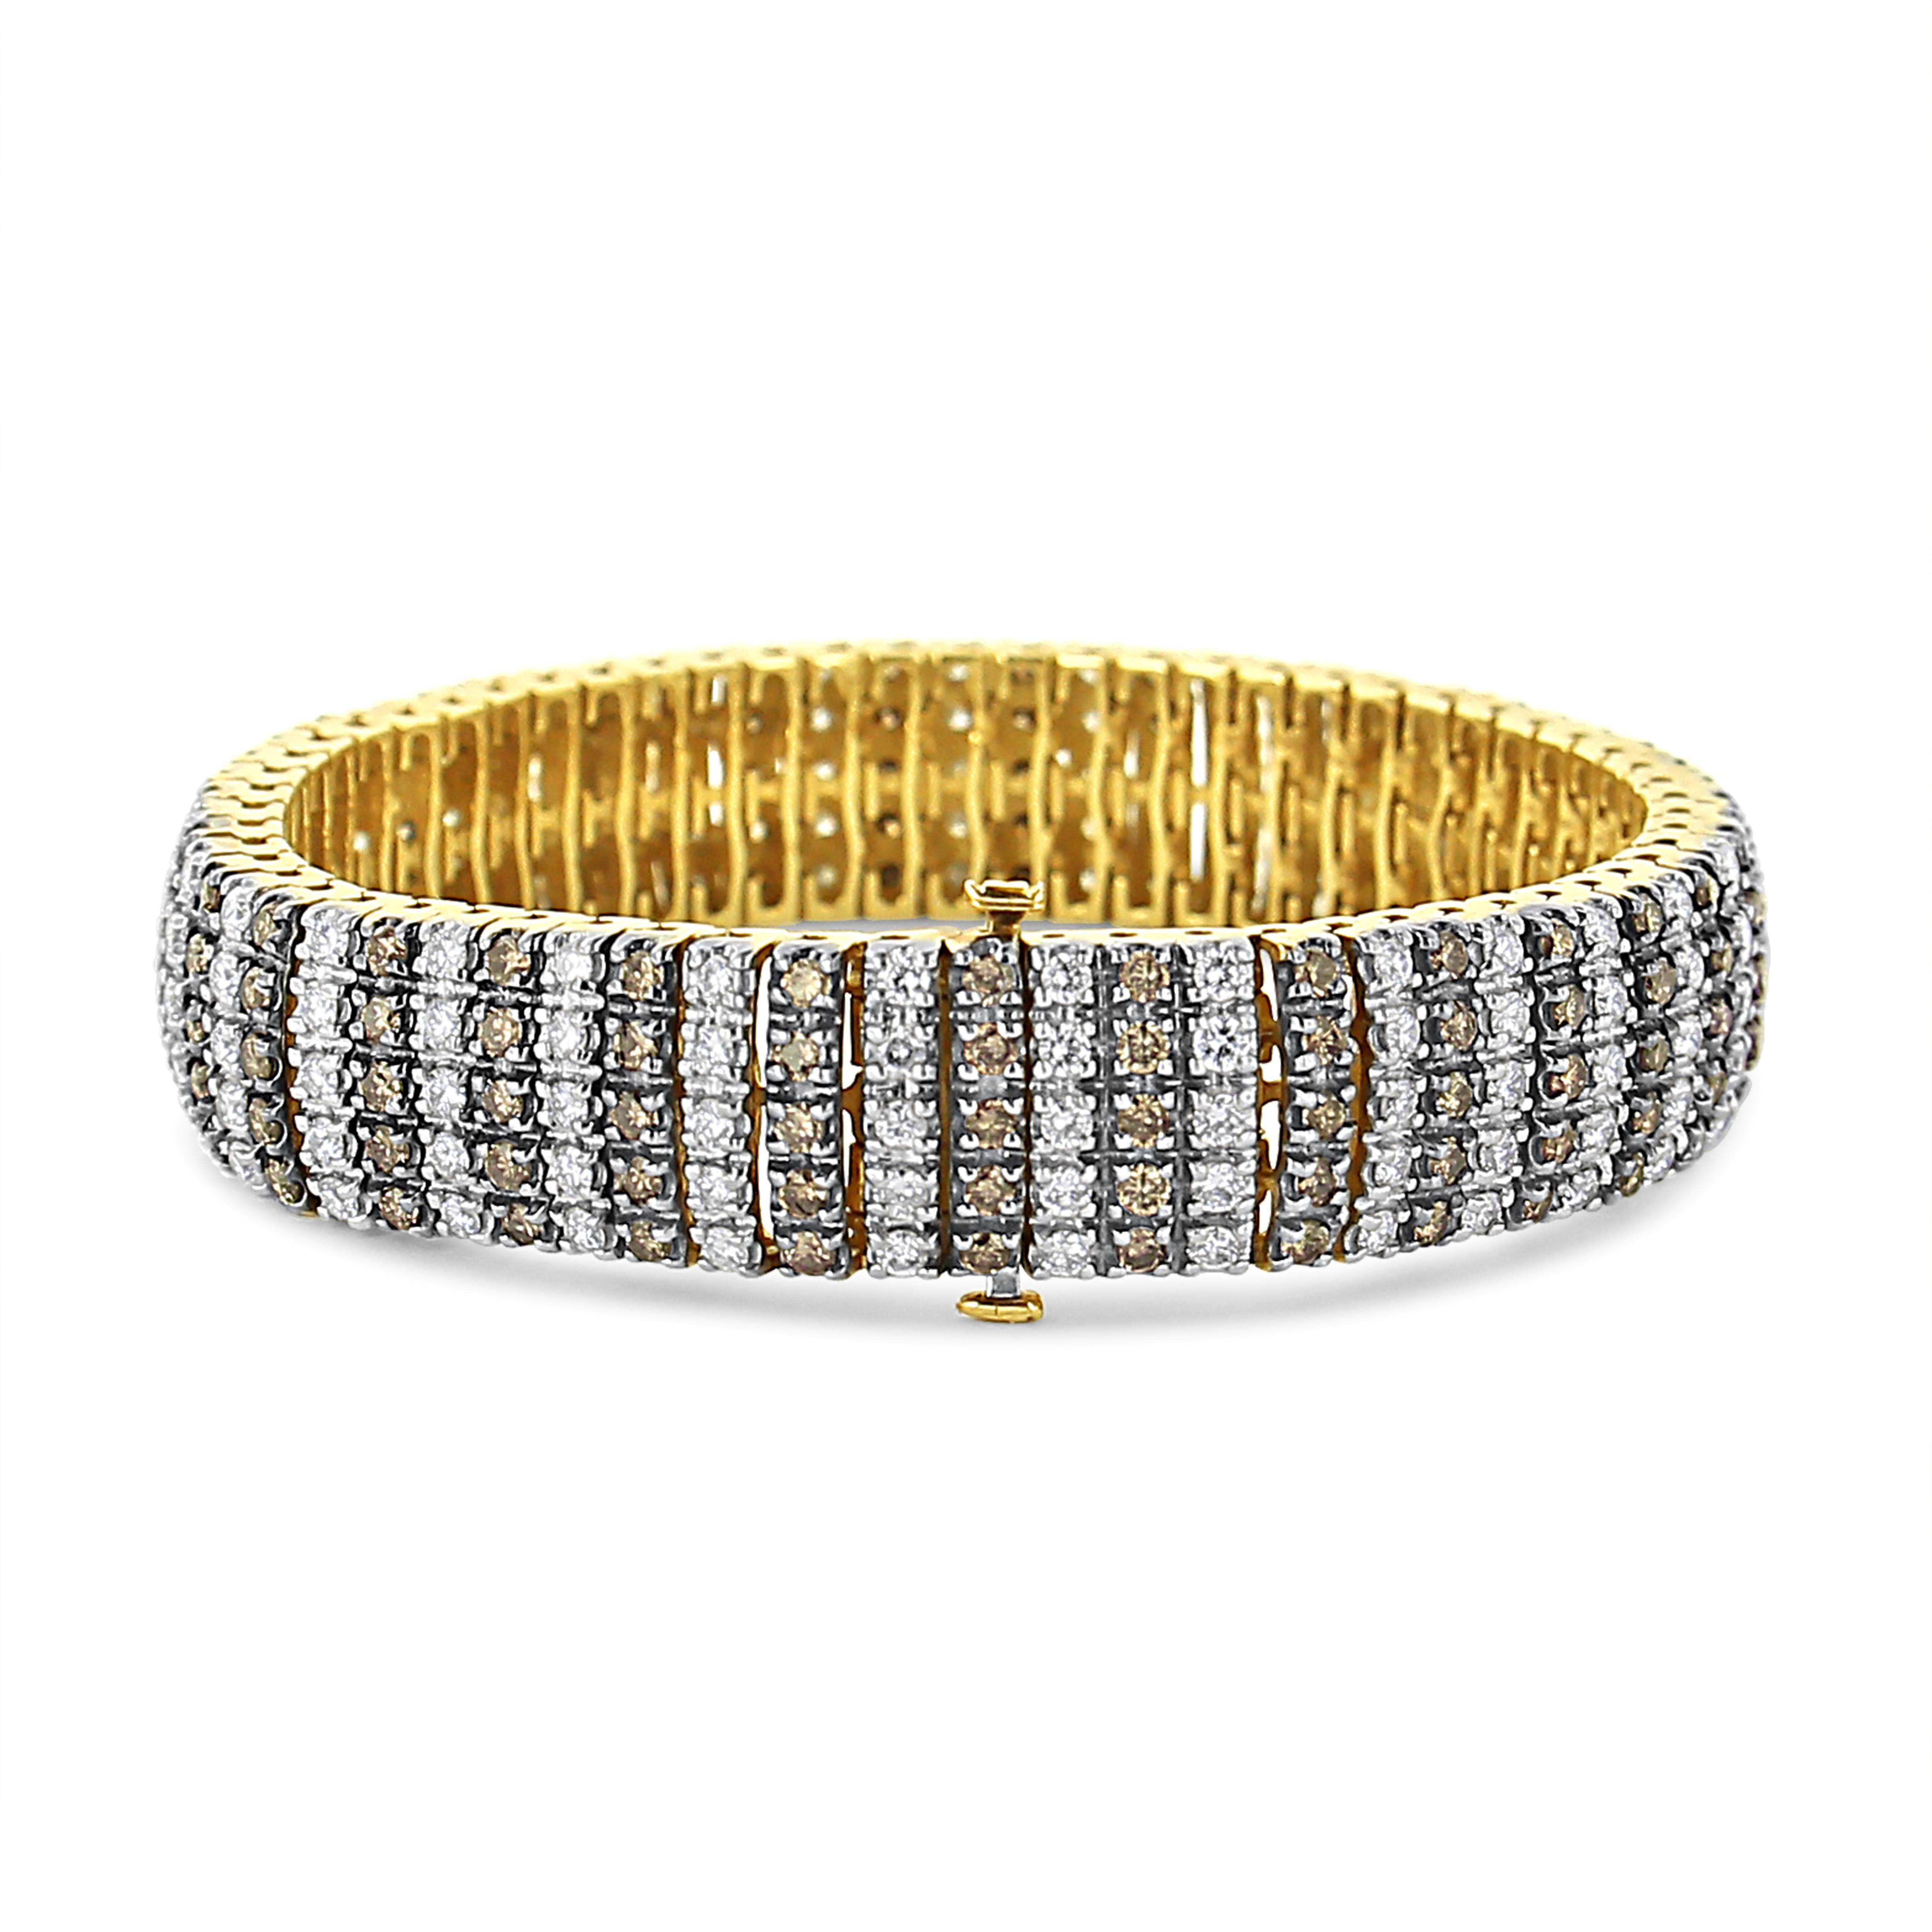 You've never seen glamour like this 10 1/3 carat diamond tennis bracelet. Set in 10k yellow gold sits rows of natural round-cut white diamonds alternating with rows of color-treated brown diamonds in a prong setting. The diamonds shine bright next